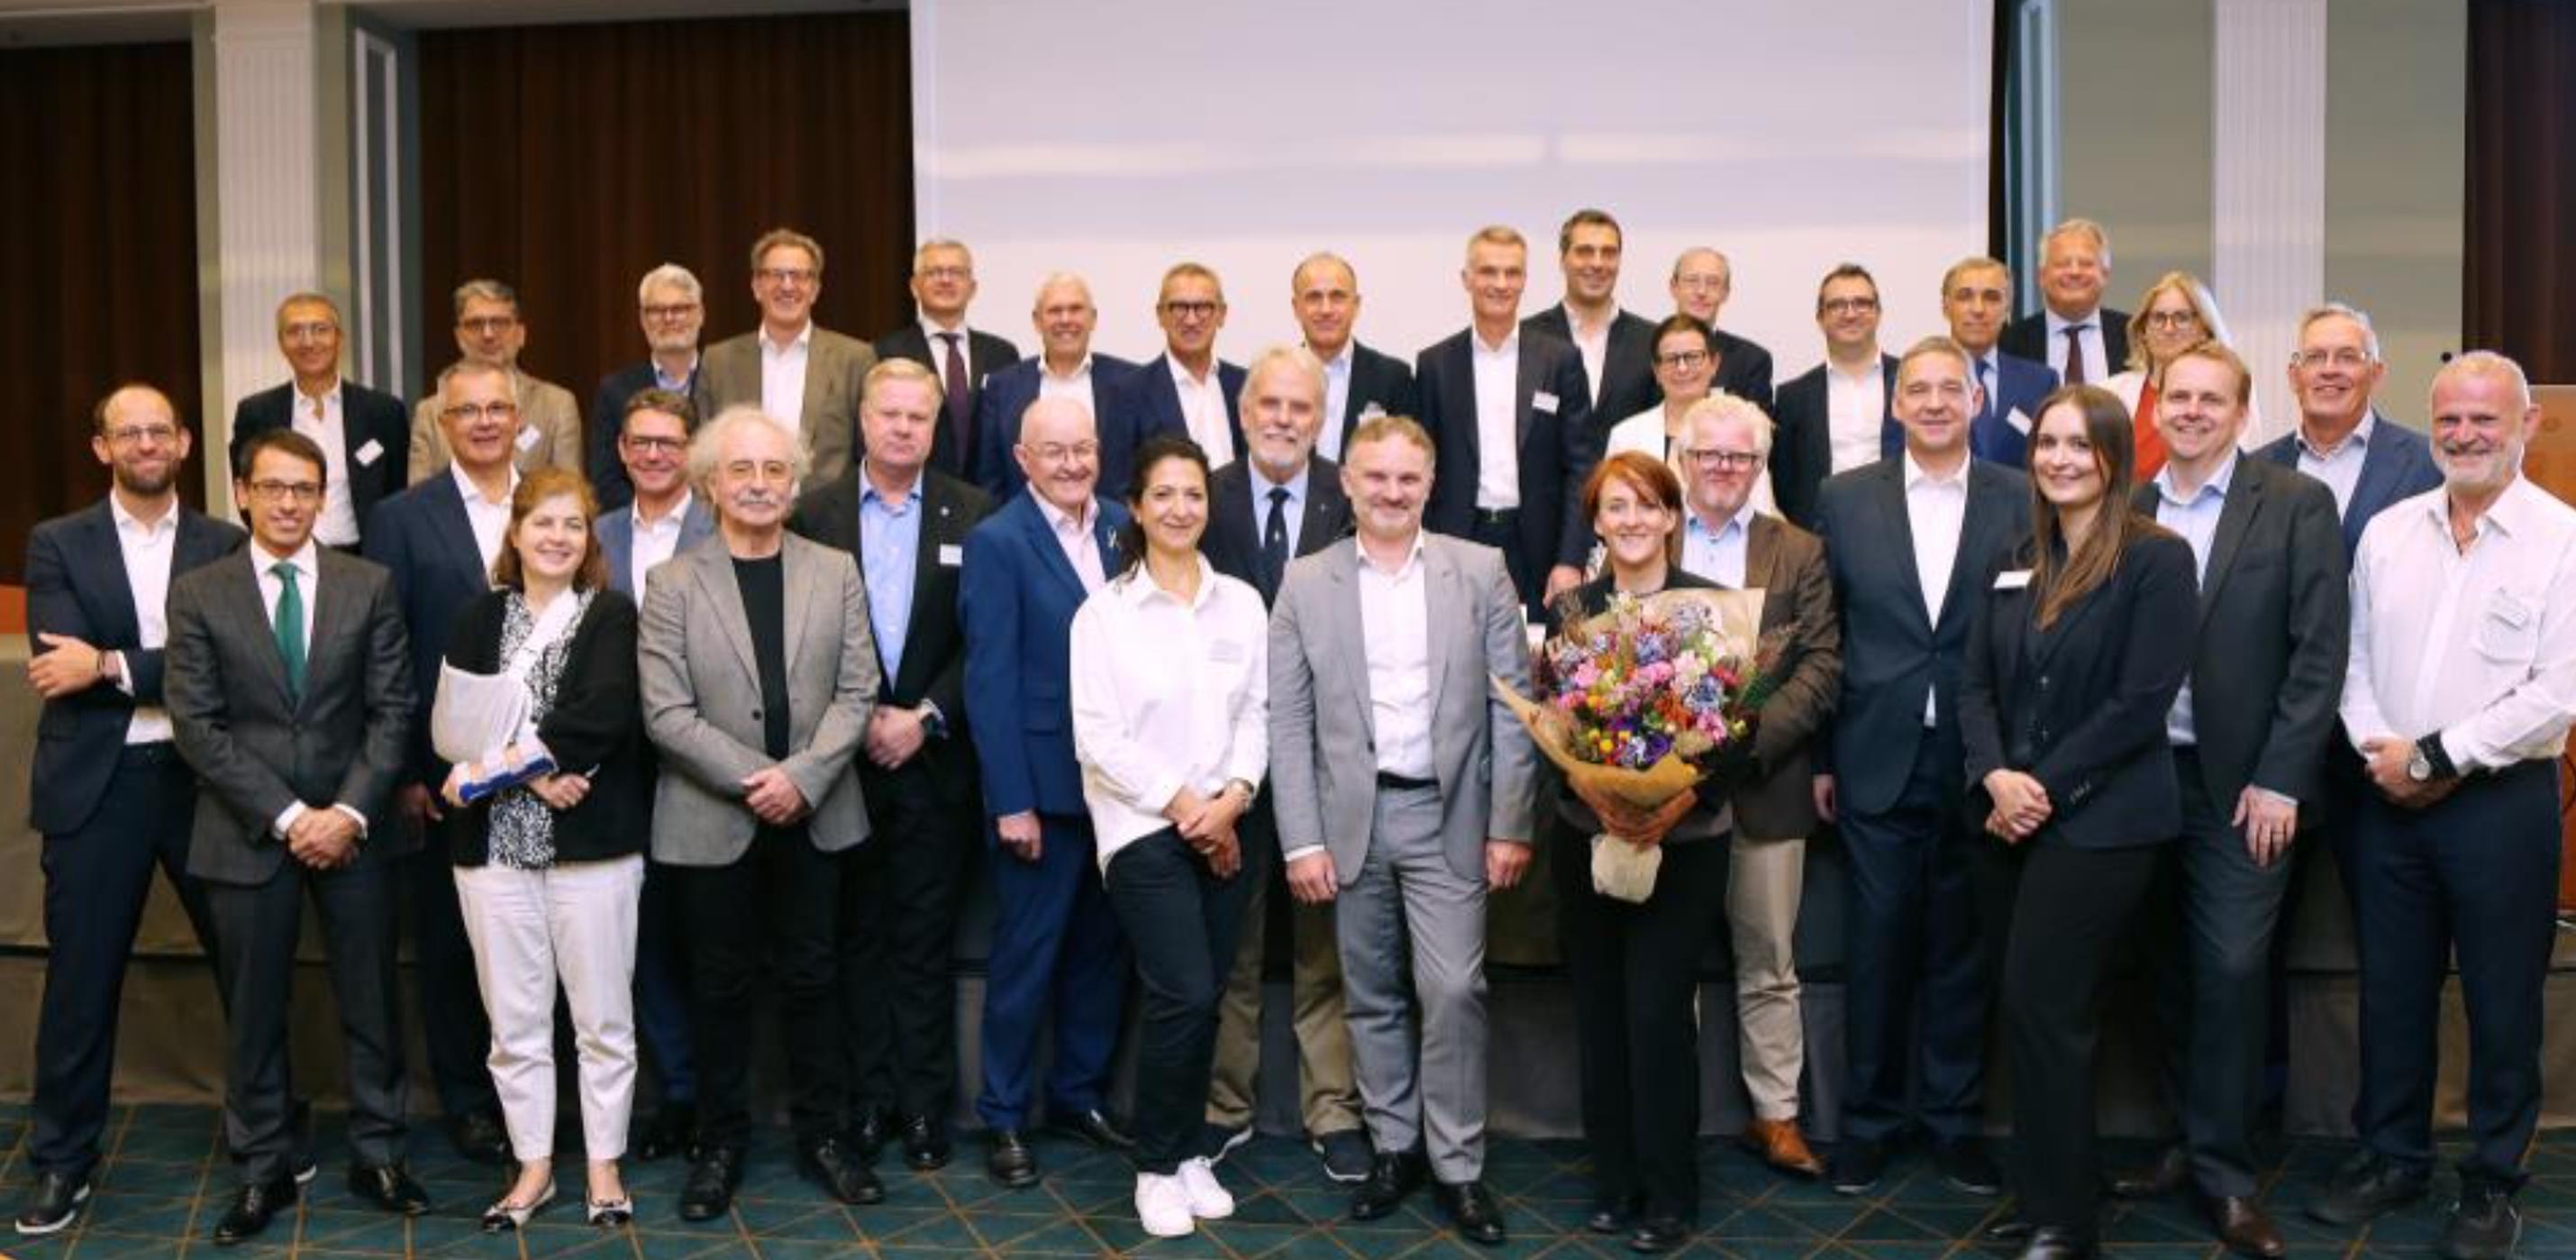 Participants of the EPA eV General Meeting and subsequent foundation meeting of the EPA AISBL after the signature of the Founding Act (Alexander Louvet)